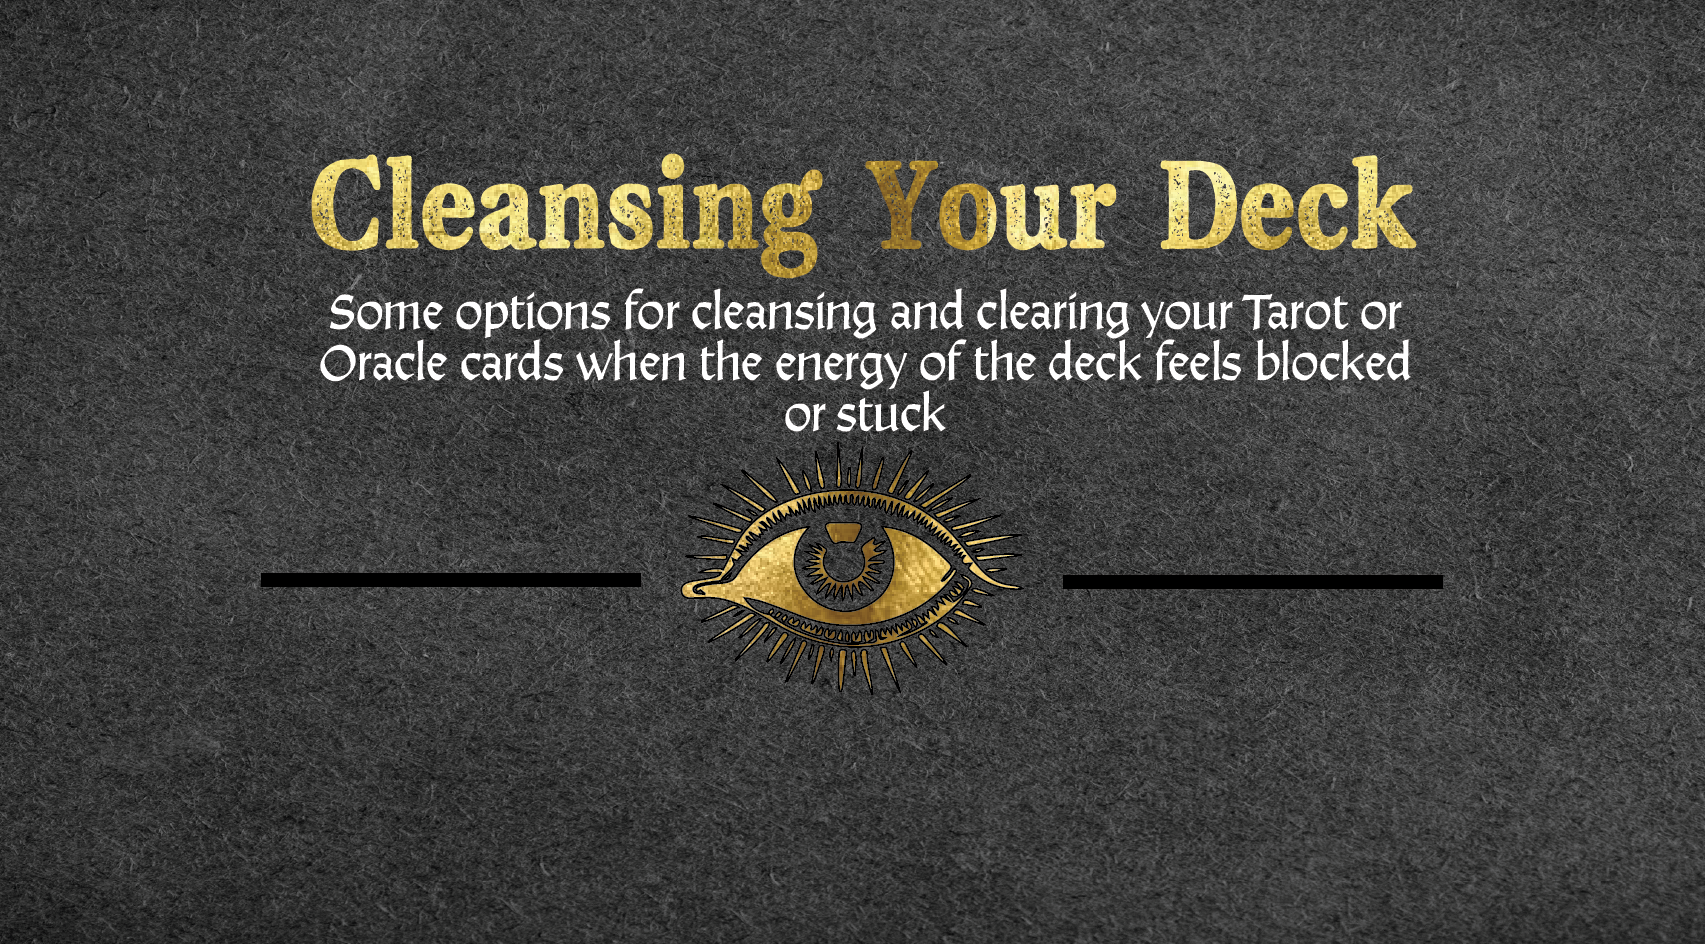 Cleansing Your Deck